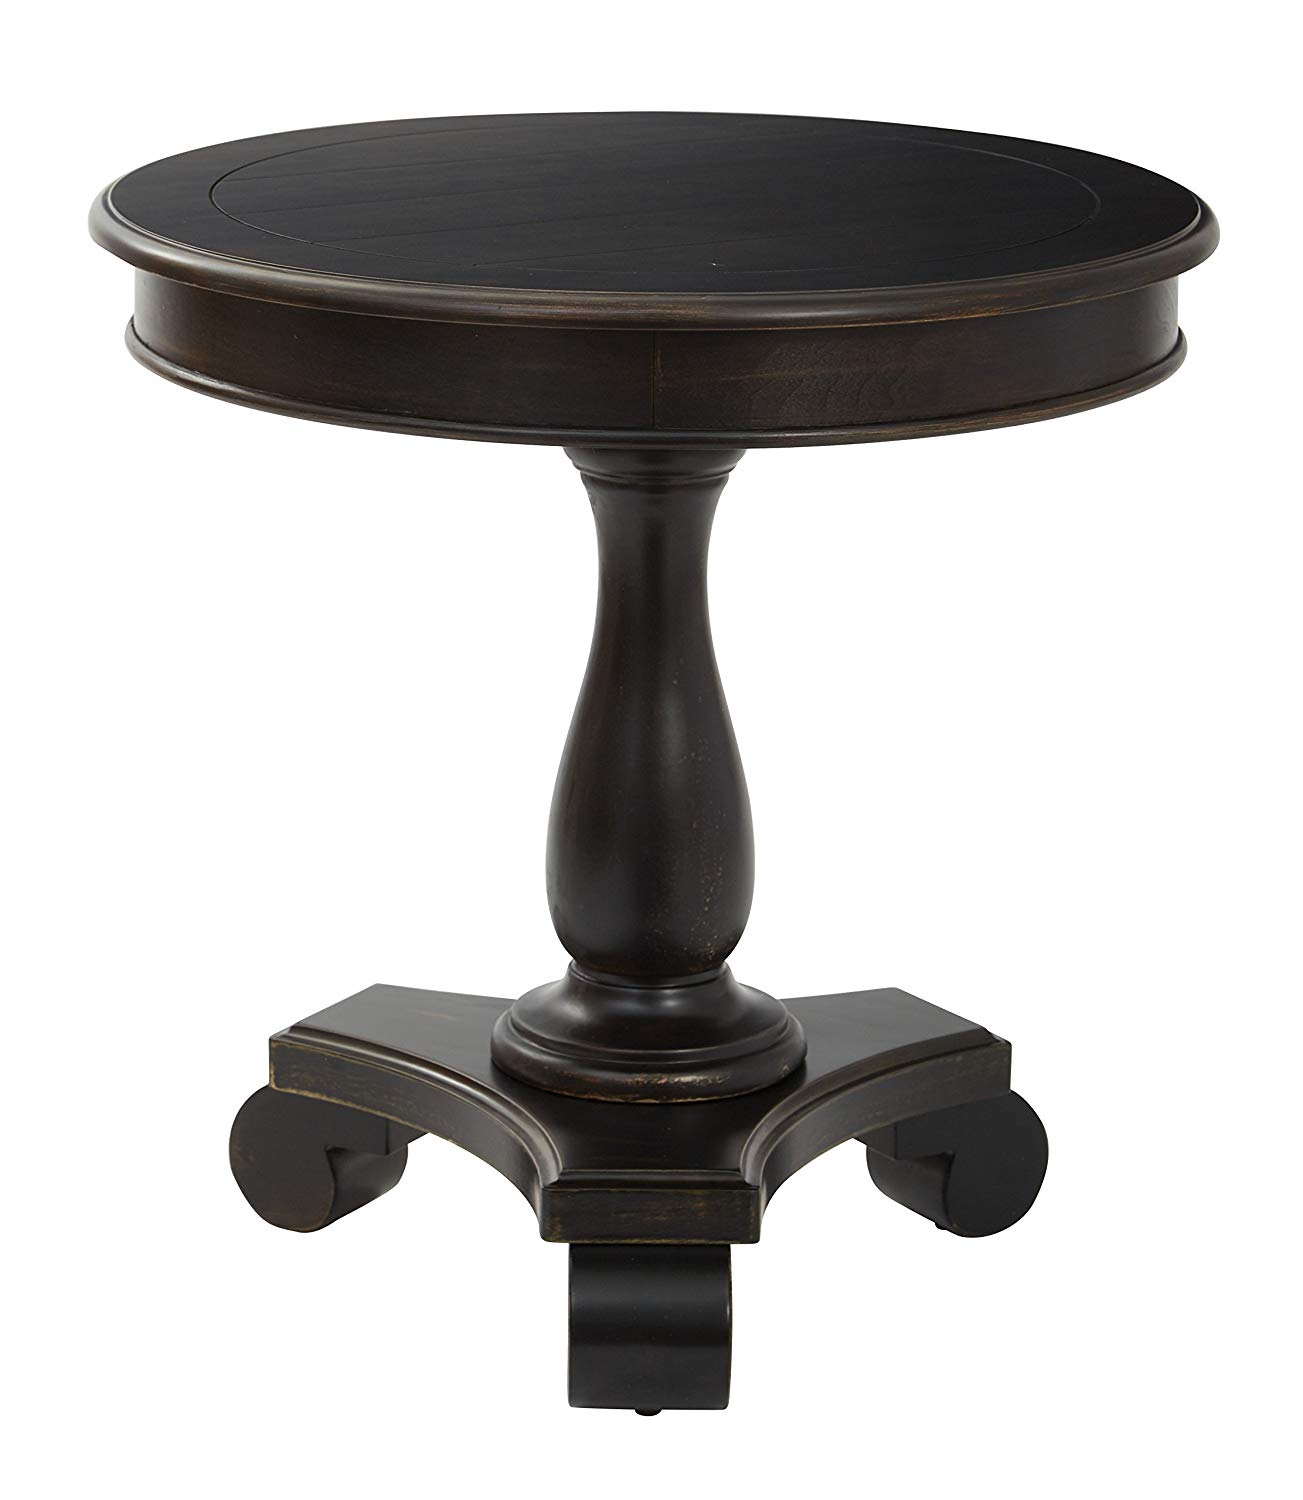 inspired bassett avlat osp avalon round accent table antique black kitchen dining mirror art side over sofa arm cement top oval linen tablecloth mats and runners west elm emmerson